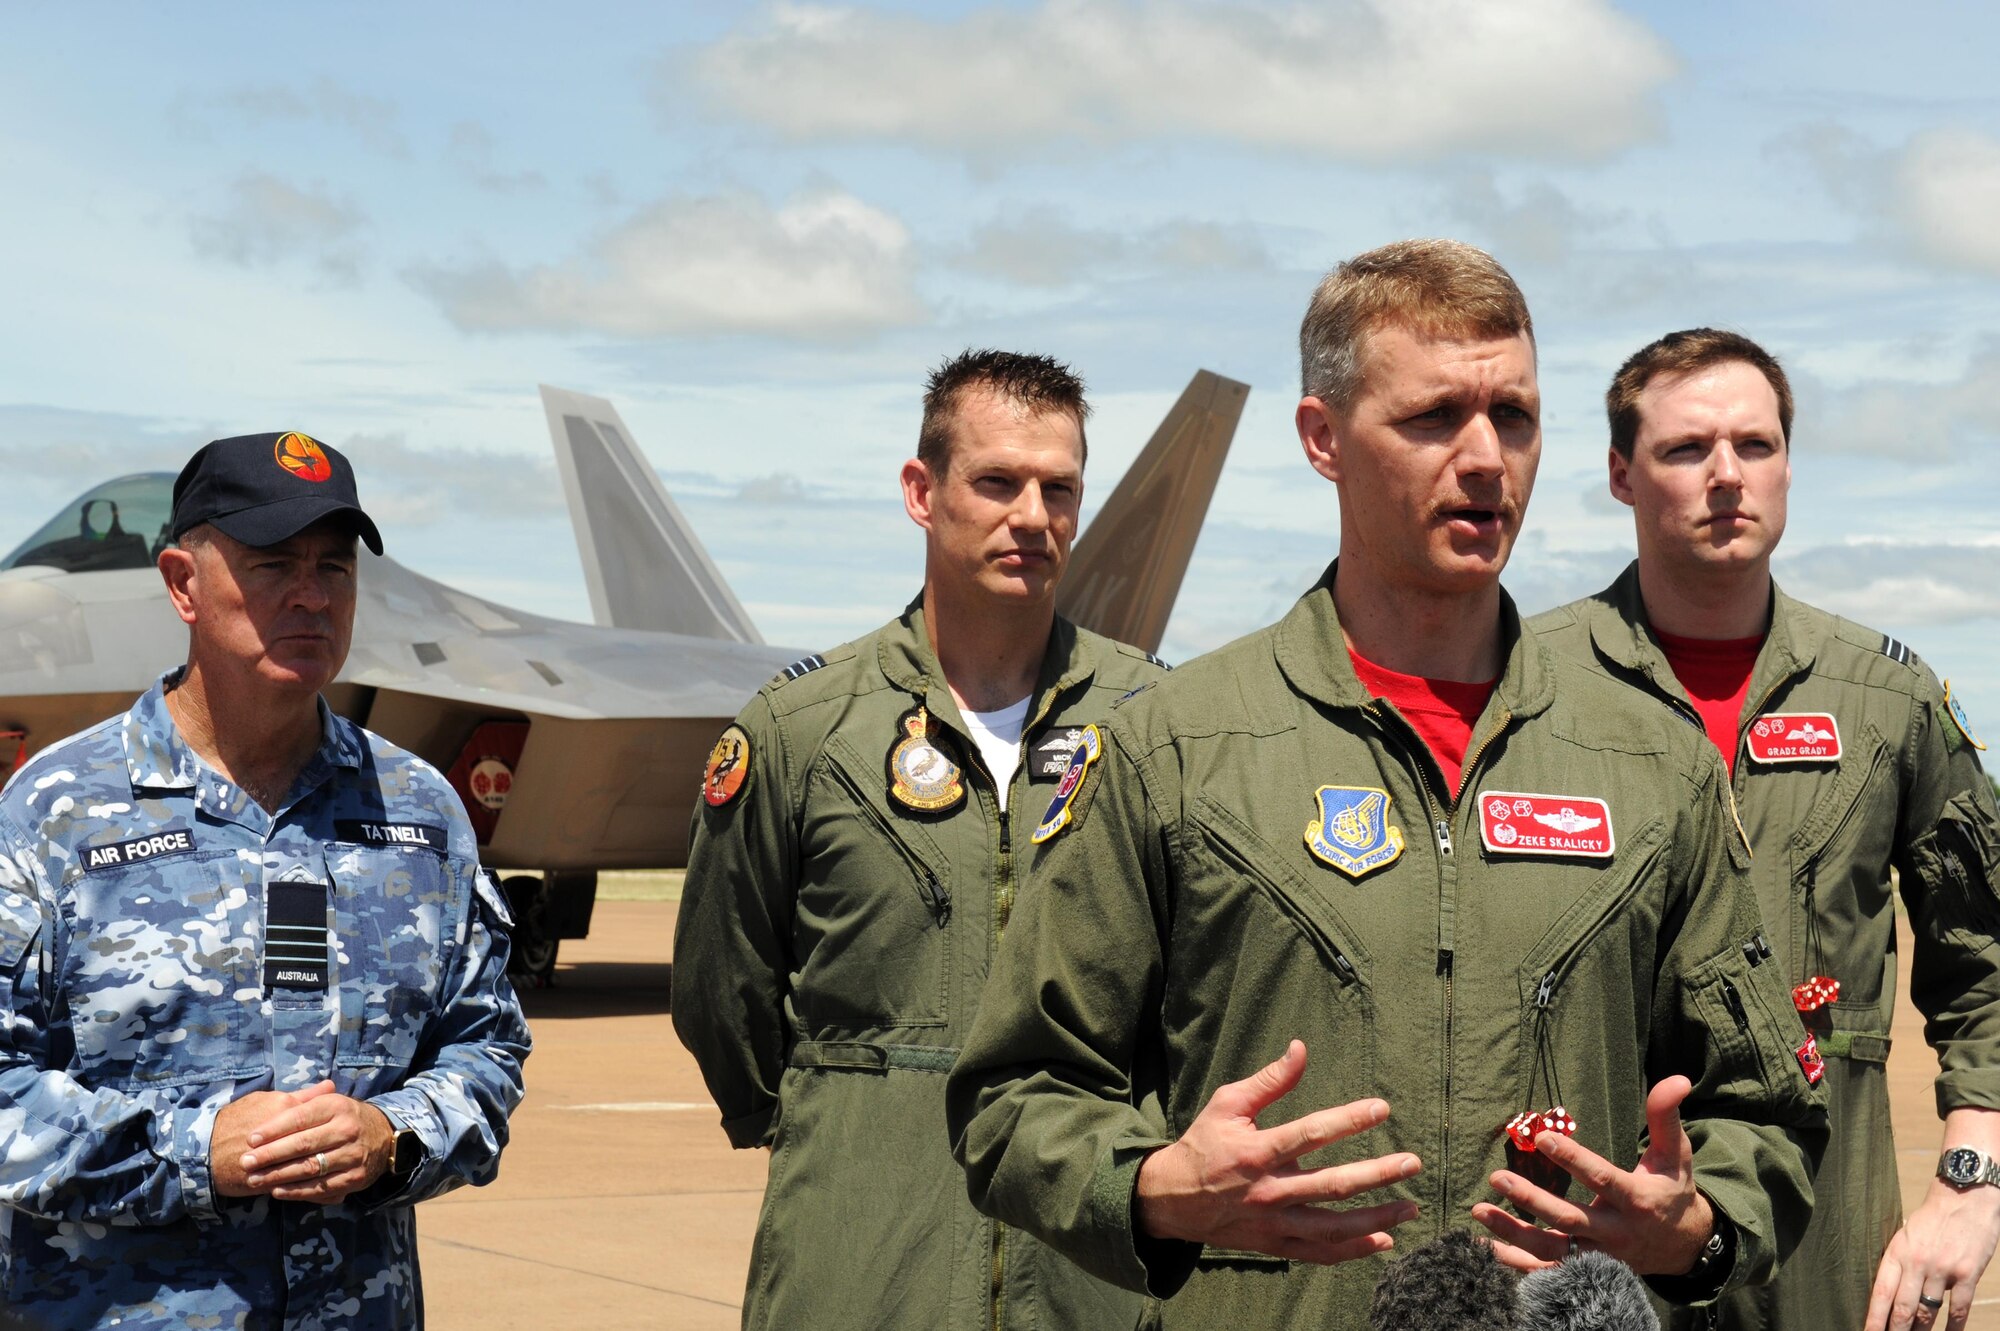 U.S. Air Force Lt. Col. David Skalicky, 90th FS commander, speak to members of the media, accompanied by Royal Australian Air Force Wing Commander Andrew Tatnell, RAAF Base Tindal Senior Australian Defence Force Officer; Wing Commander Mick Grant, 75 Squadron commander; and Flight Lieutenant William Grady, 90th Fighter Squadron exchange pilot; at RAAF Base Tindal, Australia, Feb. 24, 2017. Twelve F-22 Raptors and approximately 200 U.S. Air Force Airmen are in Australia as part of the Enhanced Air Cooperation, an initiative under the Force Posture Agreement between the U.S. and Australia. (U.S. Air Force photo by Staff Sgt. Alexander Martinez)